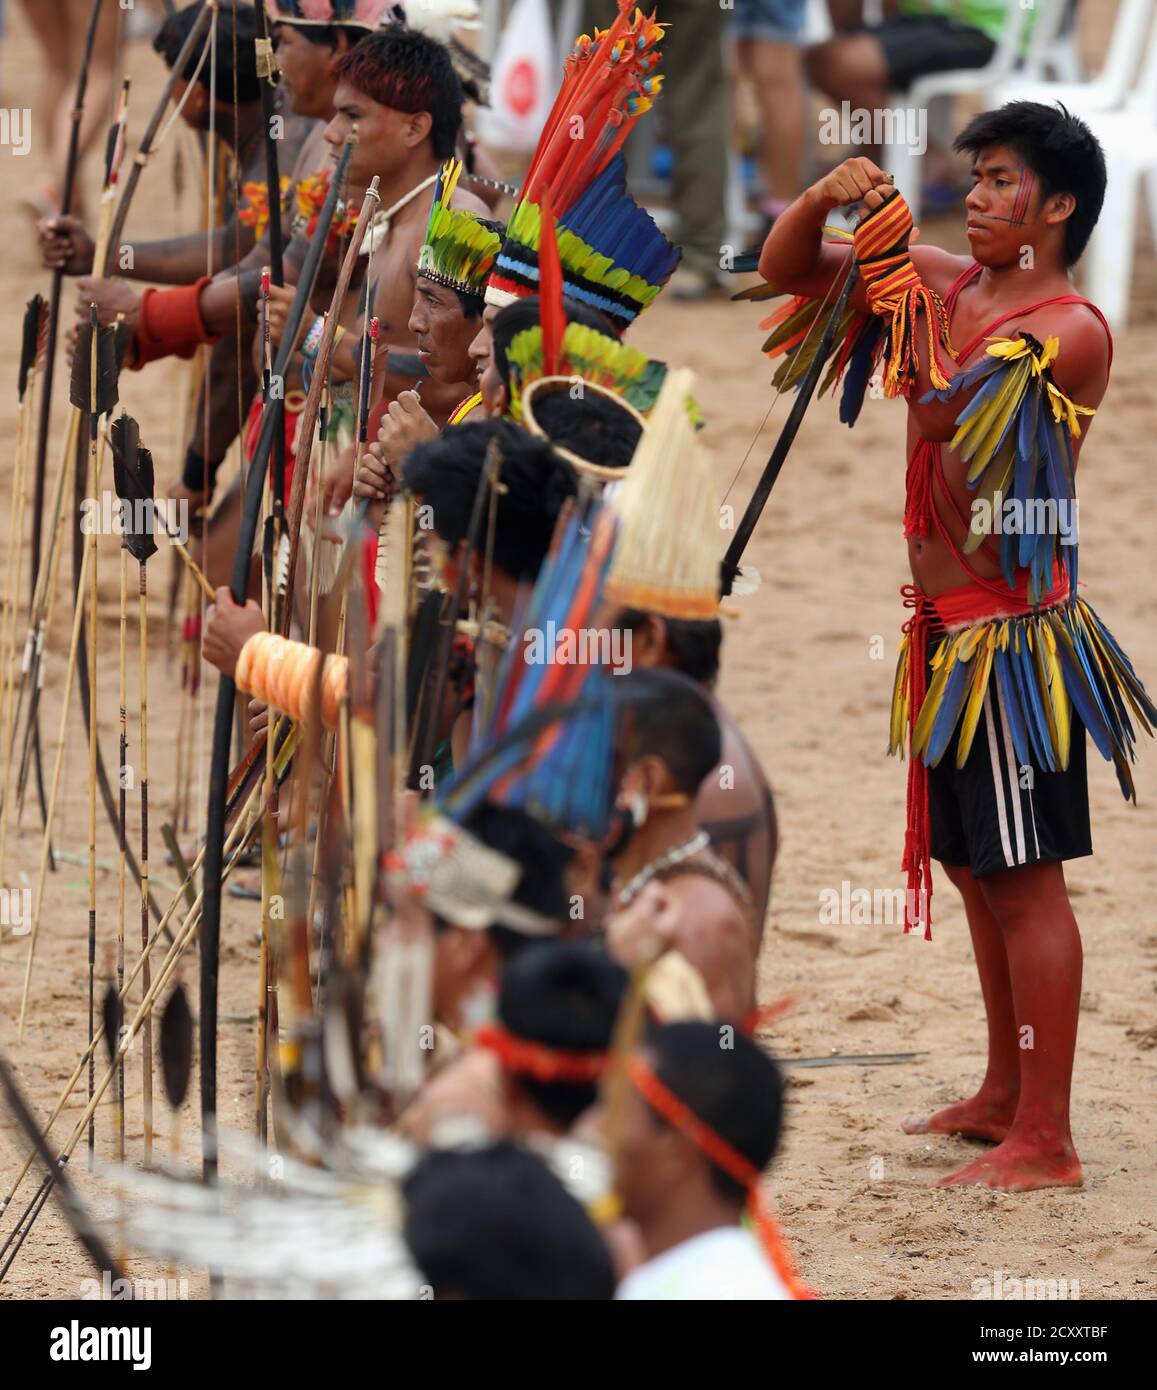 Members of Brazilian indigenous ethnic groups line up before the  bow-and-arrow competition during the XII Games of the Indigenous People, in  Cuiaba November 12, 2013. Forty eight Brazilian Indigenous tribes will  present